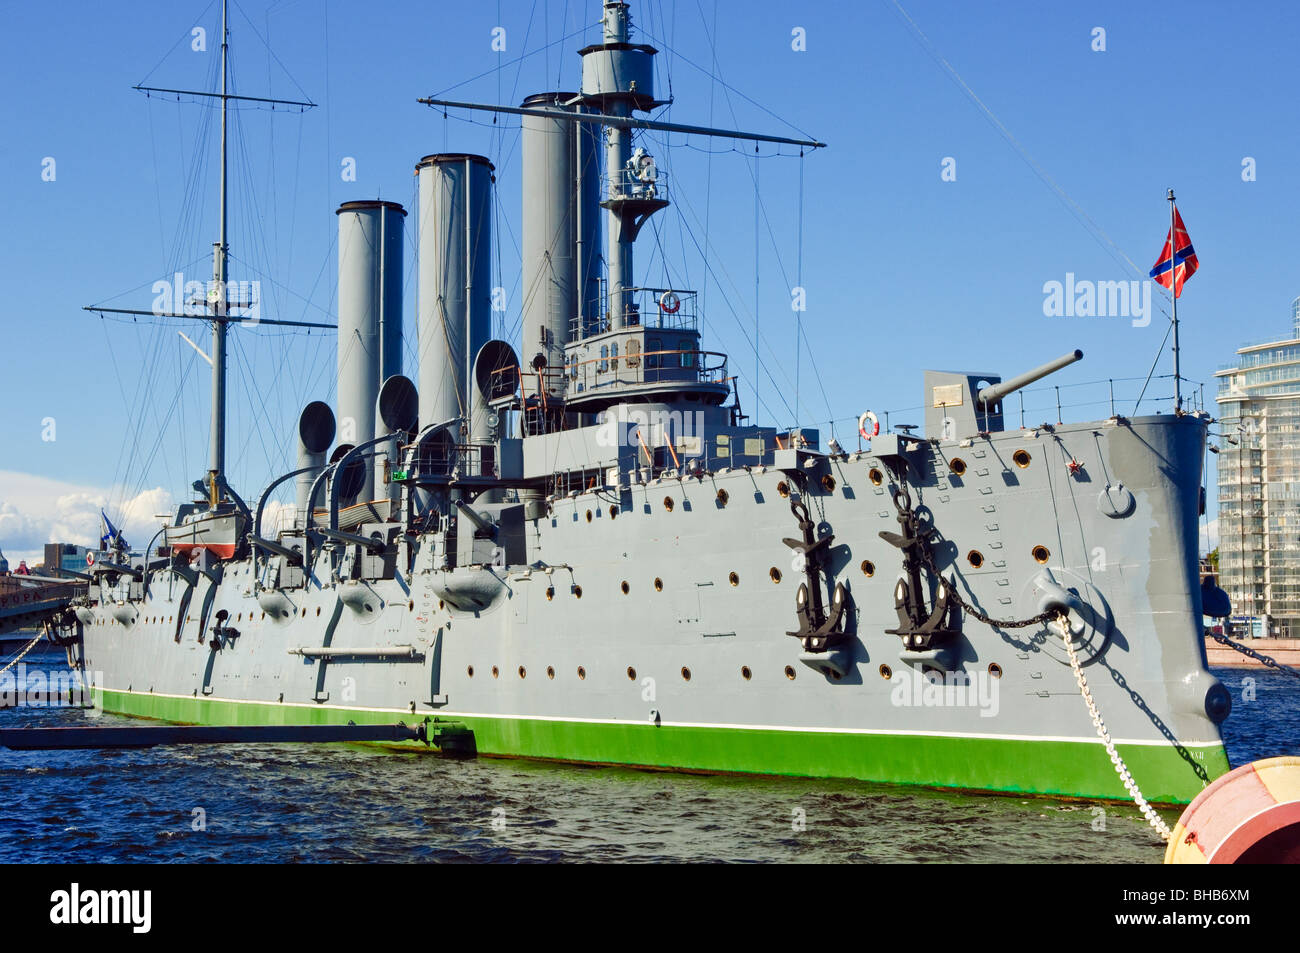 The Cruiser Aurora, famous for firing the shot which launched the October Revolution, St Petersburg, Russia Stock Photo